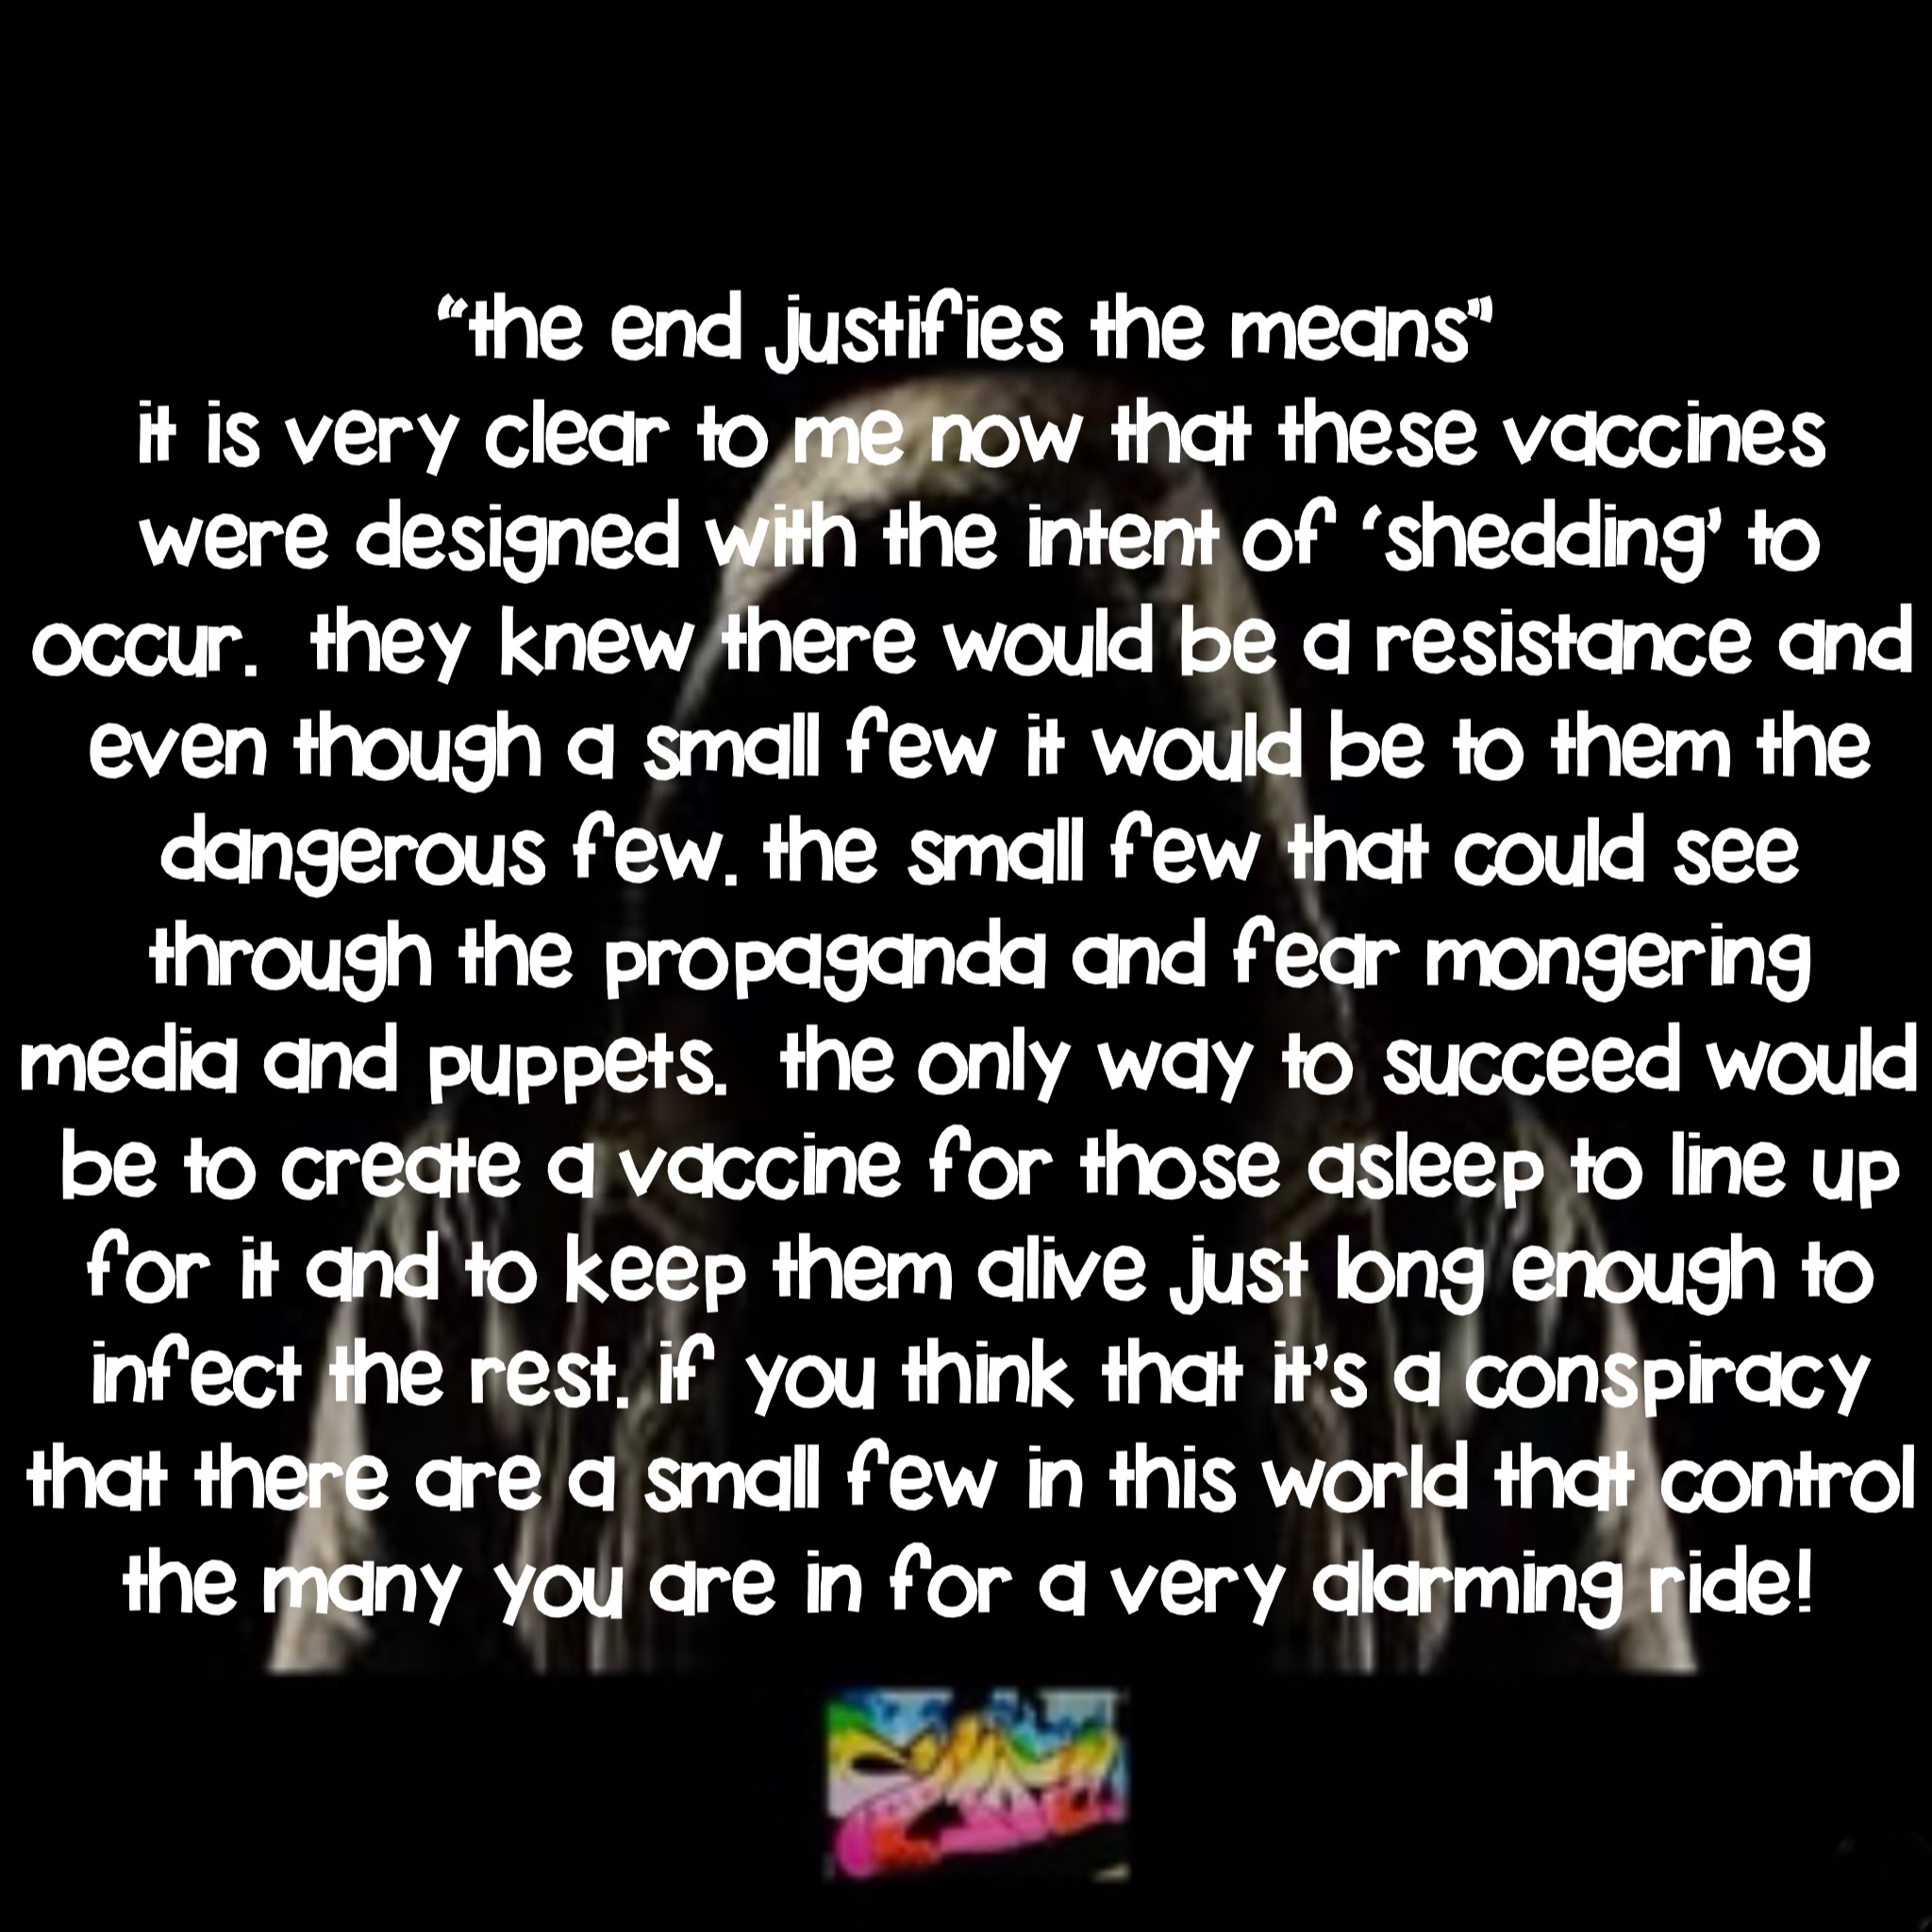 “The End Justifies the Means”
It is very clear to me now that these vaccines were designed with the intent of ‘shedding’ to occur.  They knew there would be a resistance and even though a small few it would be to them the dangerous few. The small few that could see through the propaganda and fear mongering media and puppets.  The only way to succeed would be to create a vaccine for those asleep to line up for it and to keep them alive just long enough to infect the rest. If you think that it’s a conspiracy that there are a small few in this world that control the many you are in for a very alarming ride!